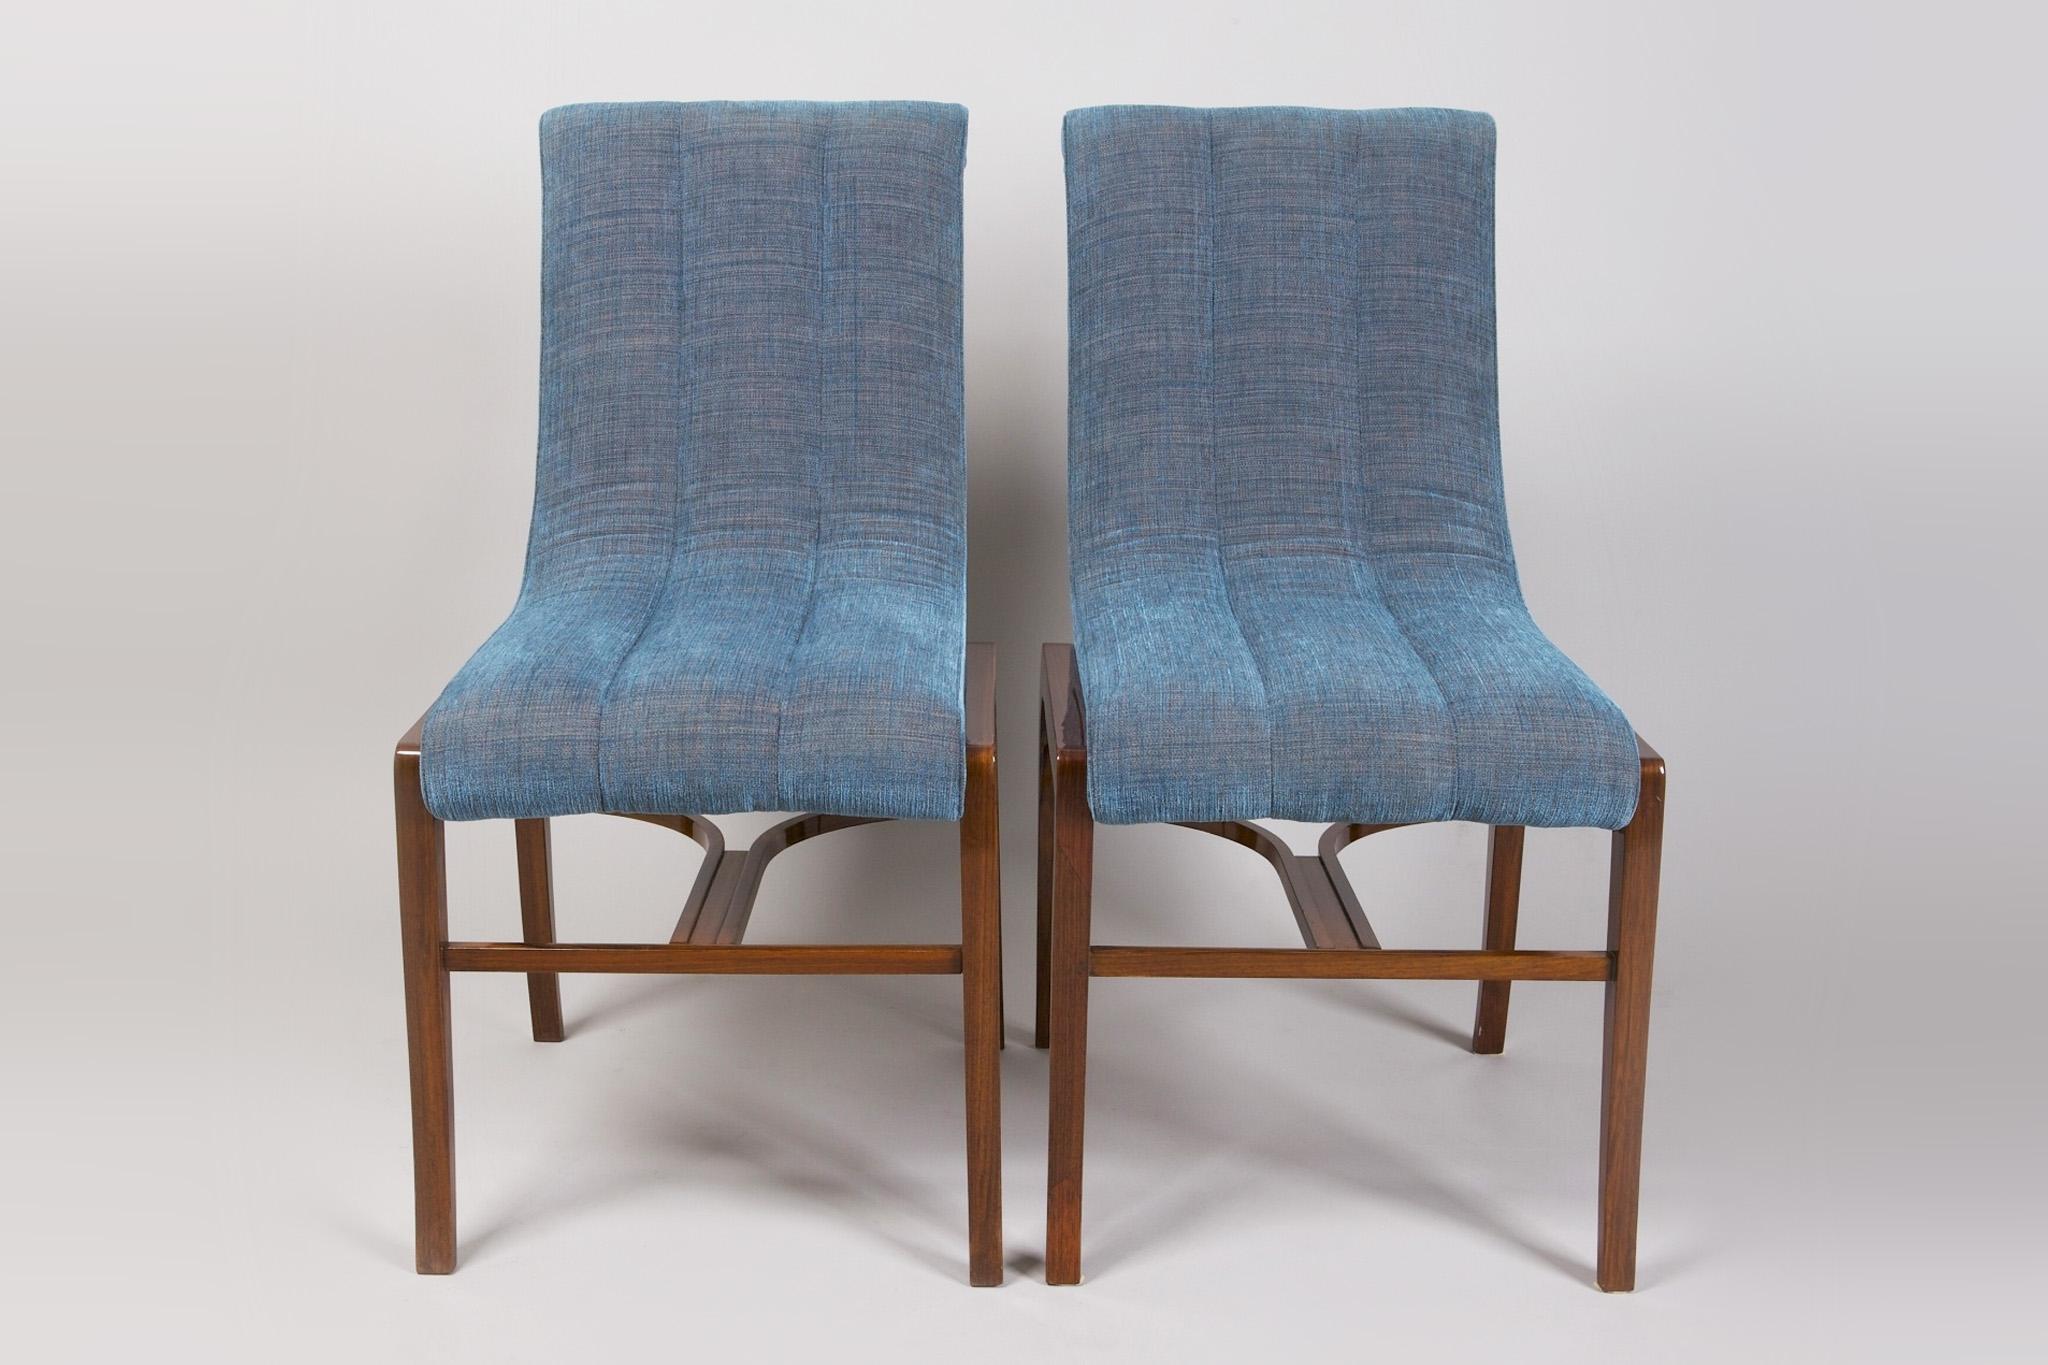 Pair of French Art Deco chairs designed by Jules Leleu.
Material: Rosewood / palisander.
Completely restored, surface made by piano lacquers to the high gloss. New fabric reministencts genius loci of period 1925.

We guarantee safe a the